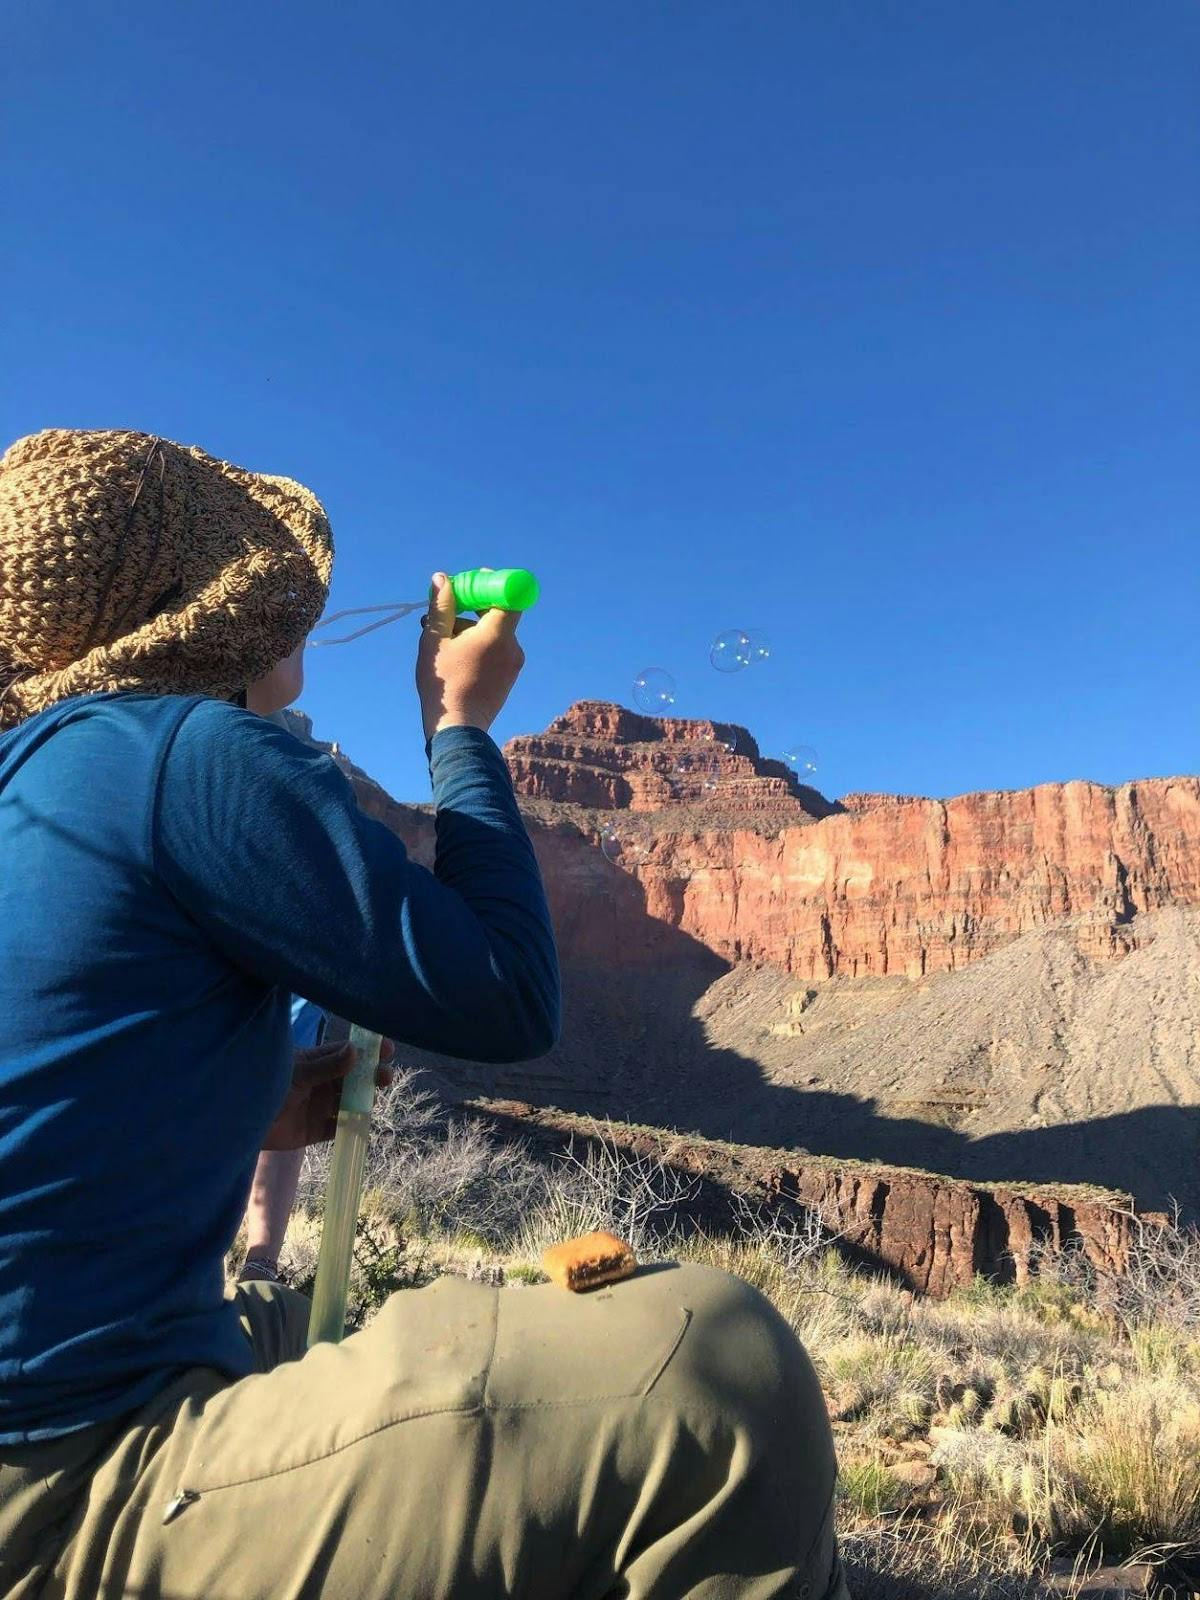 Hiker blowing bubbles with butte in the background on a sunny mountain day.